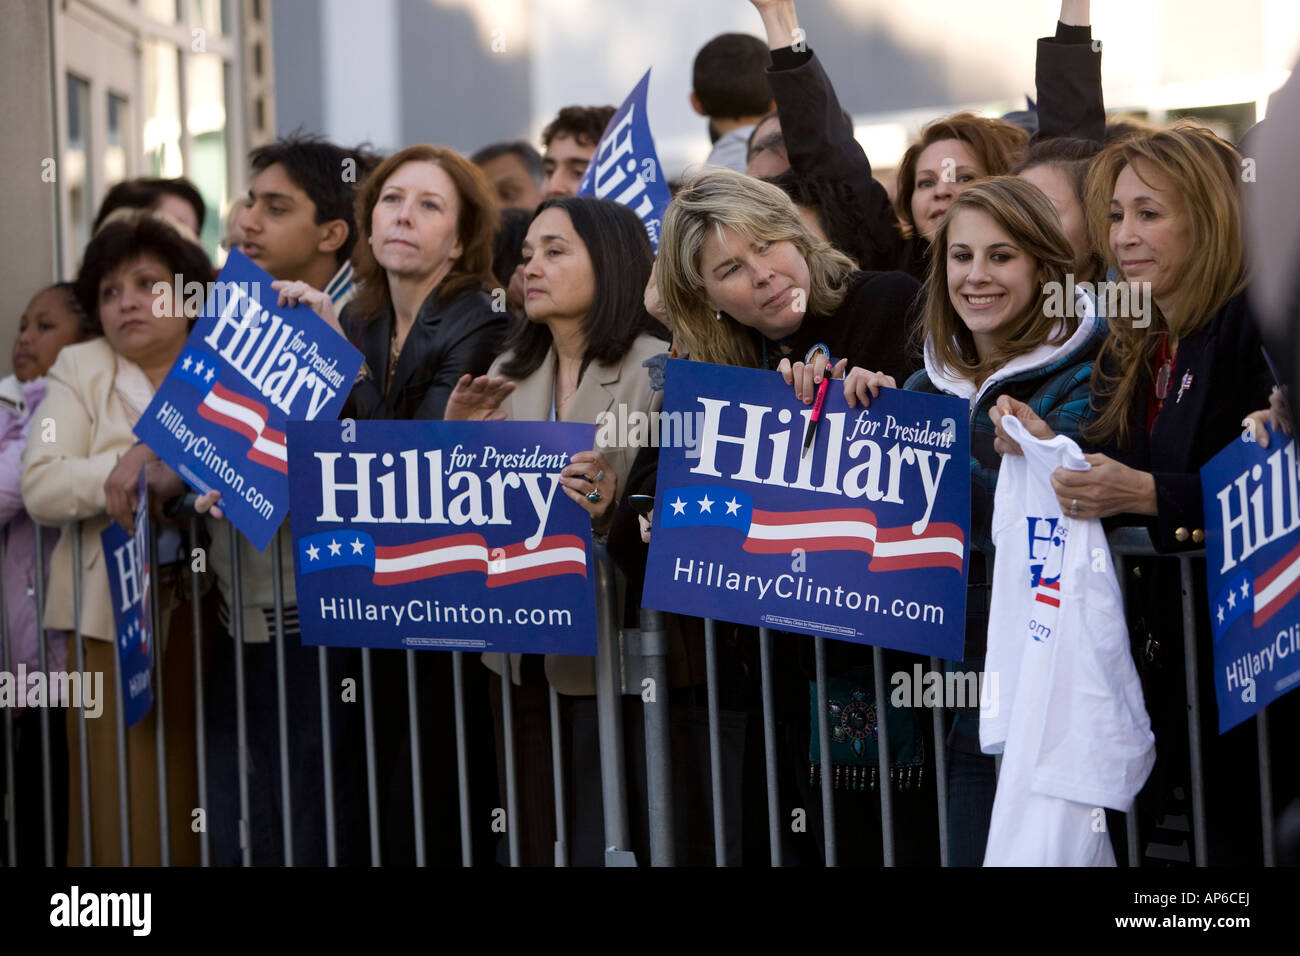 Hillary Clinton supporters at a rally in Northridge, California Stock Photo